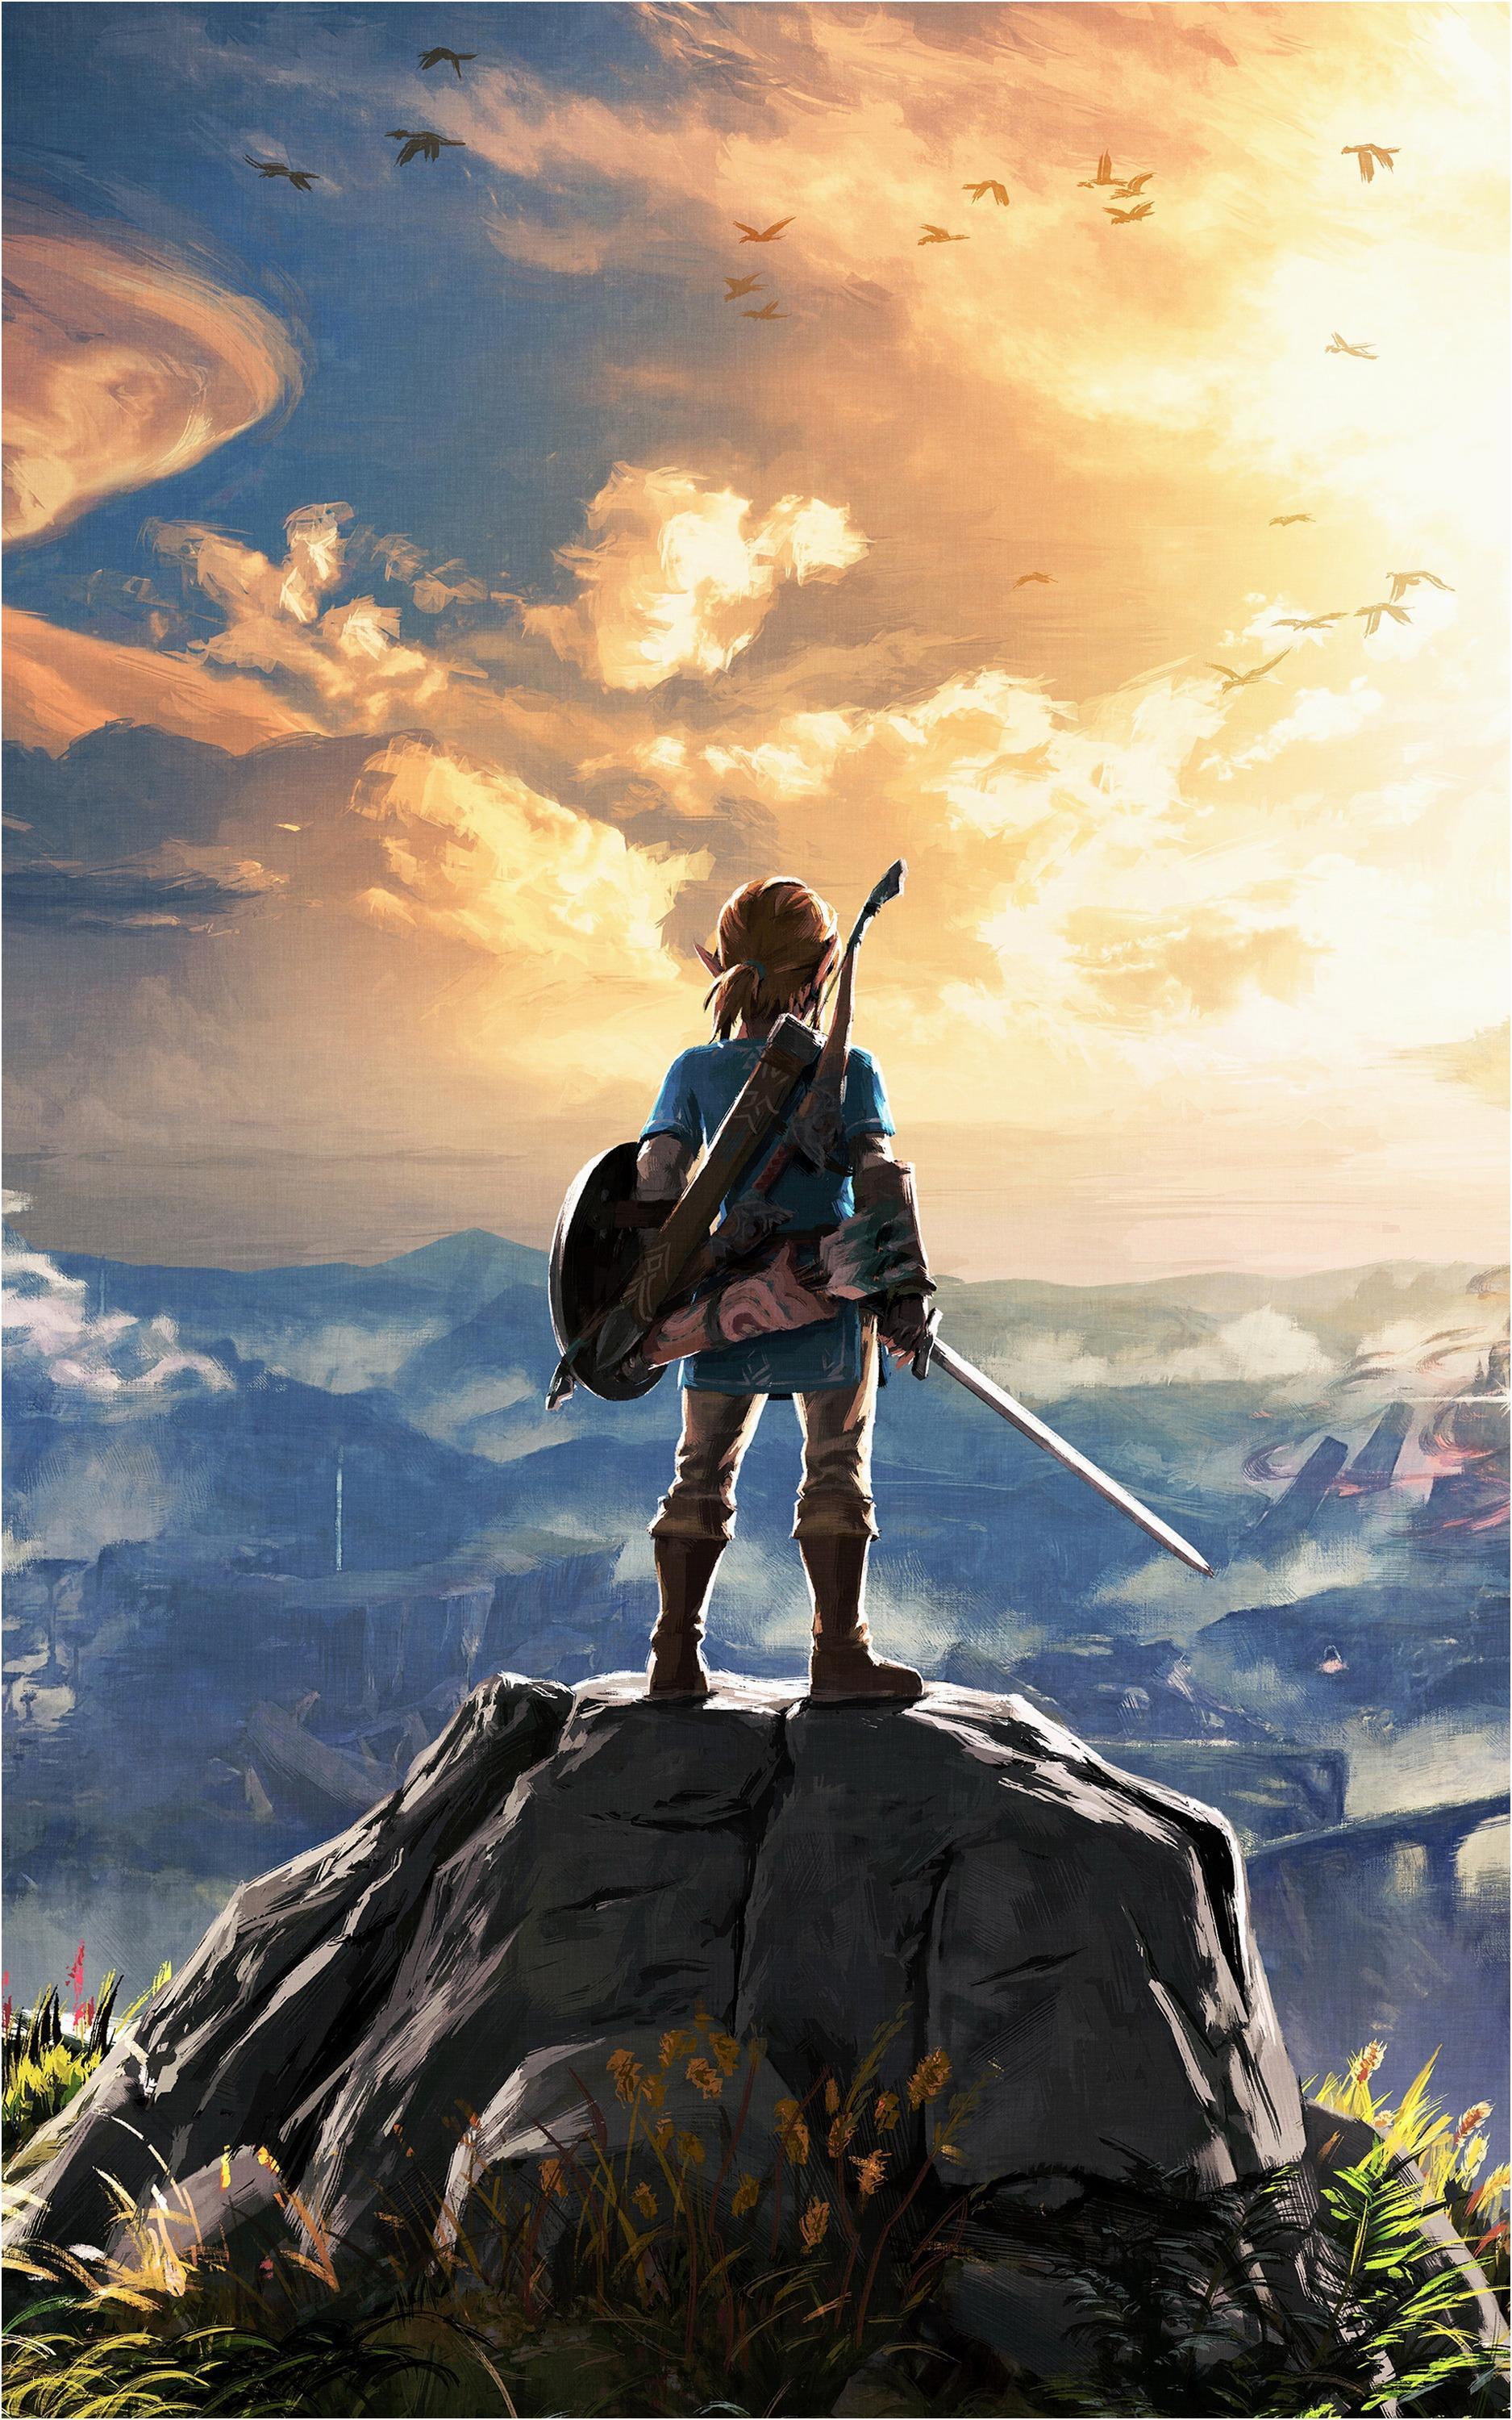 Download Breath Of The Wild Phone Wallpaper, HD Background